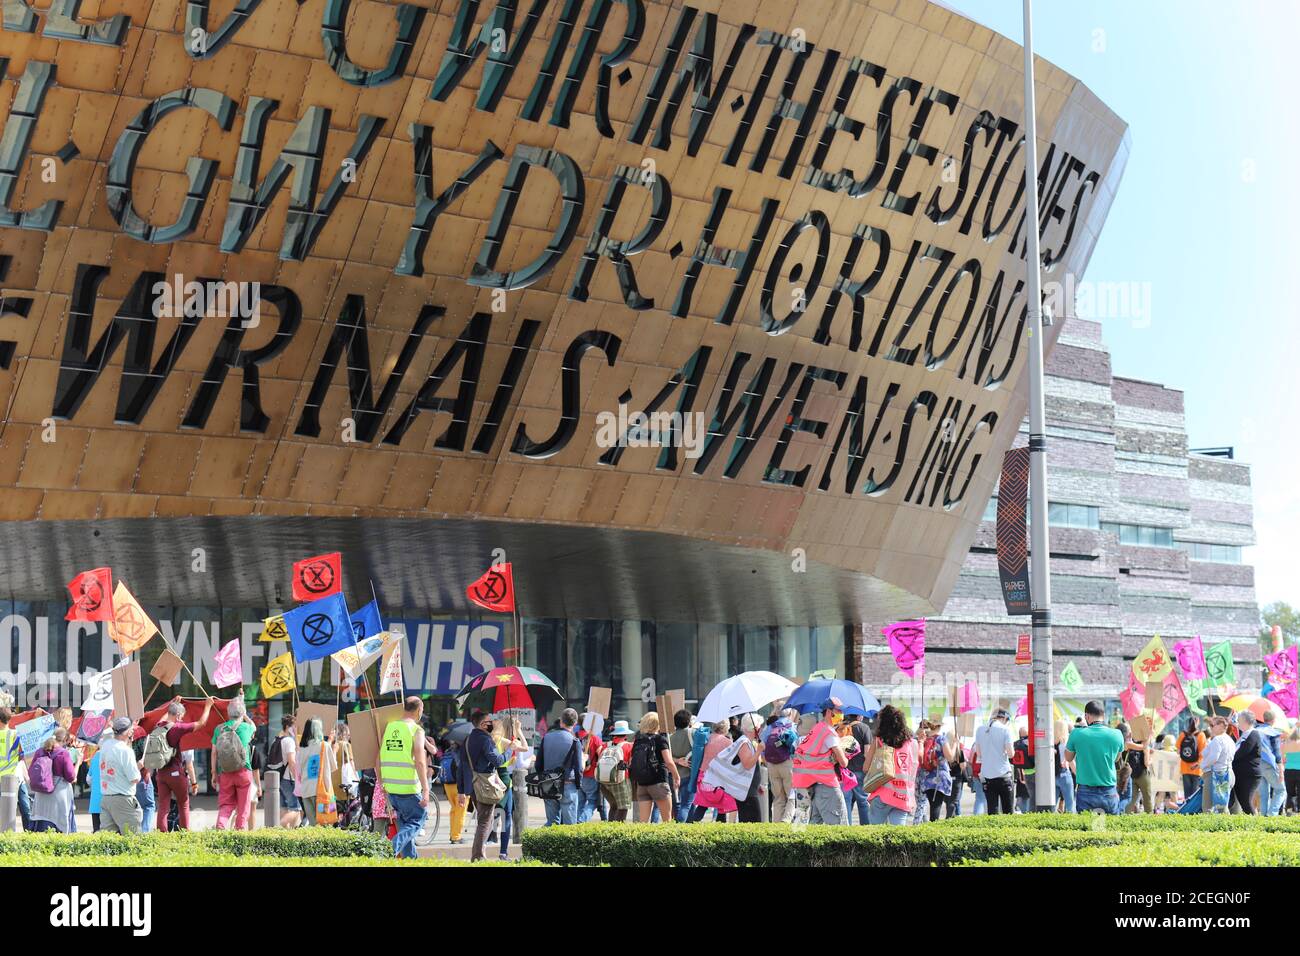 Cardiff, Wales, UK. 1st September 2020. Extinction Rebellion protestors take over Cardiff and march on the Senedd to demand a green recovery and passing of the CEE Bill on day one of a week of action. Protesters march around the old Senedd building Credit: Denise Laura Baker/Alamy Live News Stock Photo